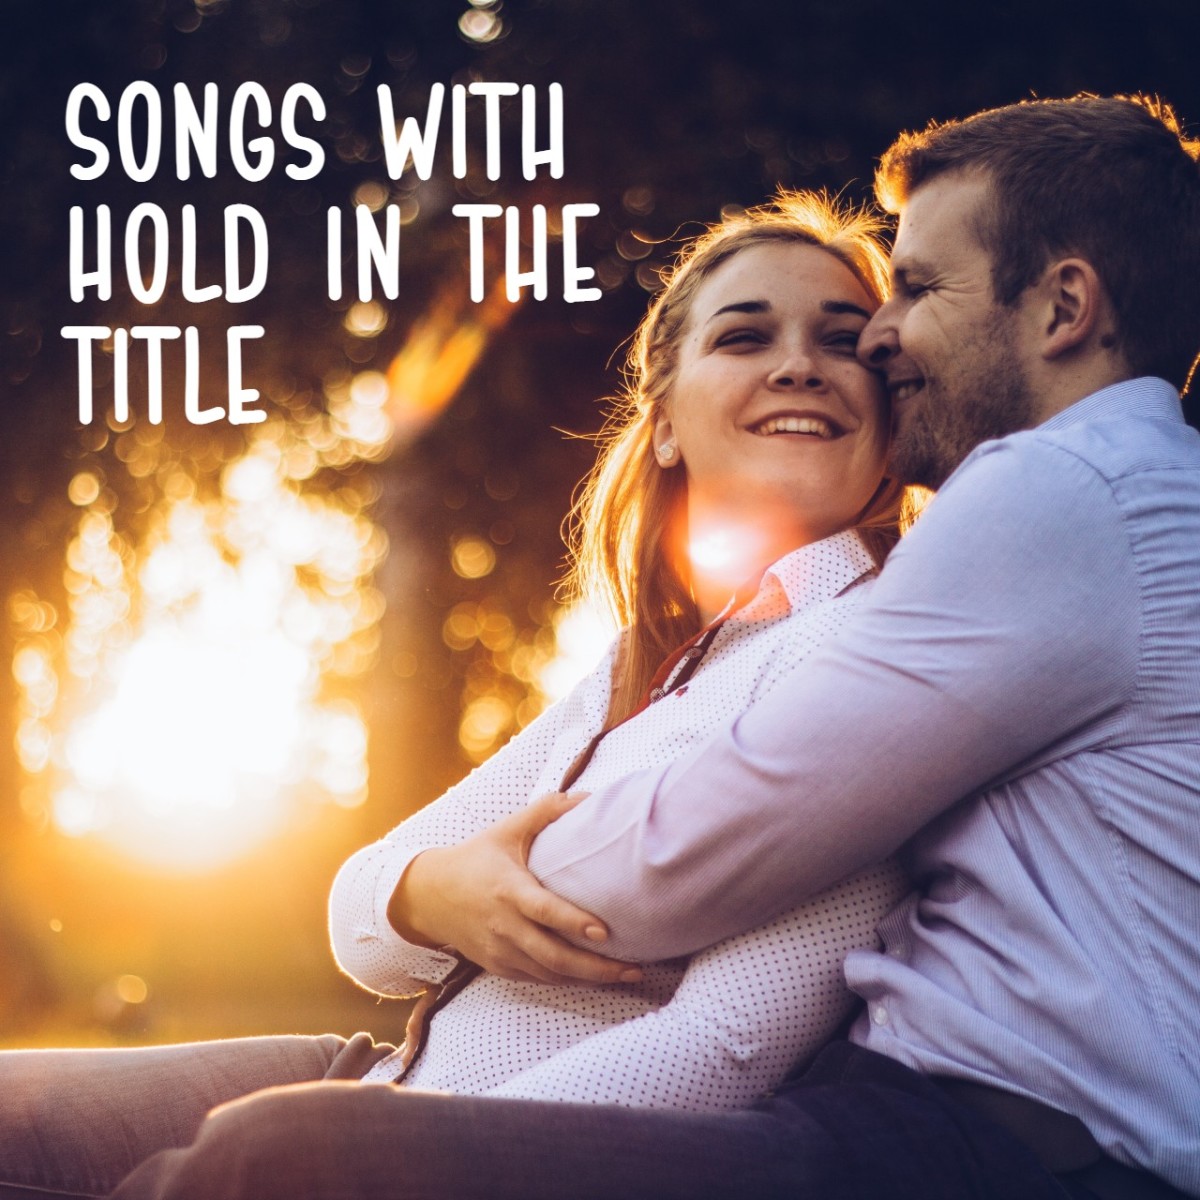 Whether you're holding hands, holding back, holding out, holding on, or holding your own, make a playlist of pop, rock, country, and R&B songs with hold in the title. 